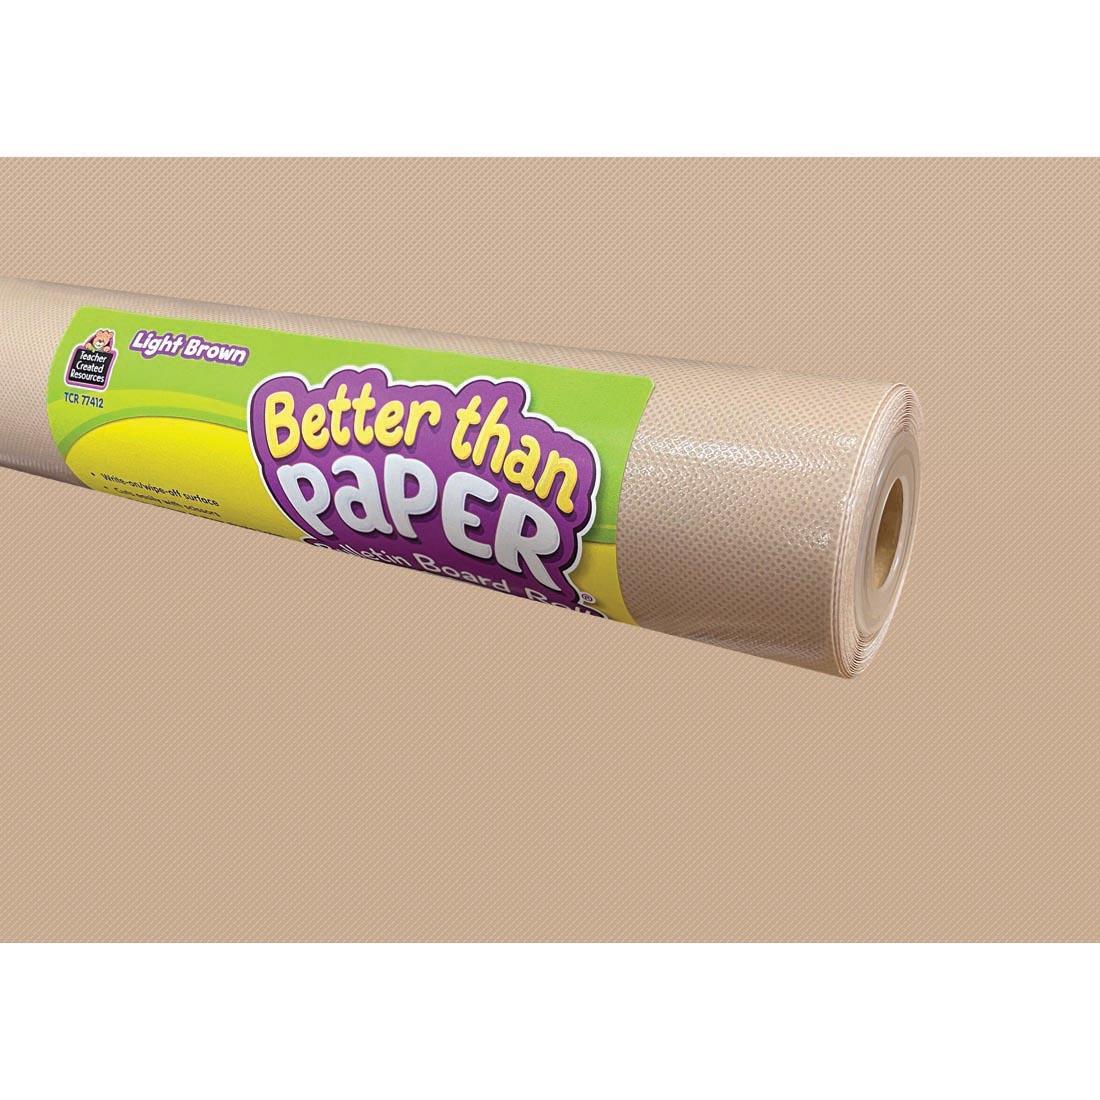 Light Brown Better Than Paper Bulletin Board Roll with it shown in use in the background